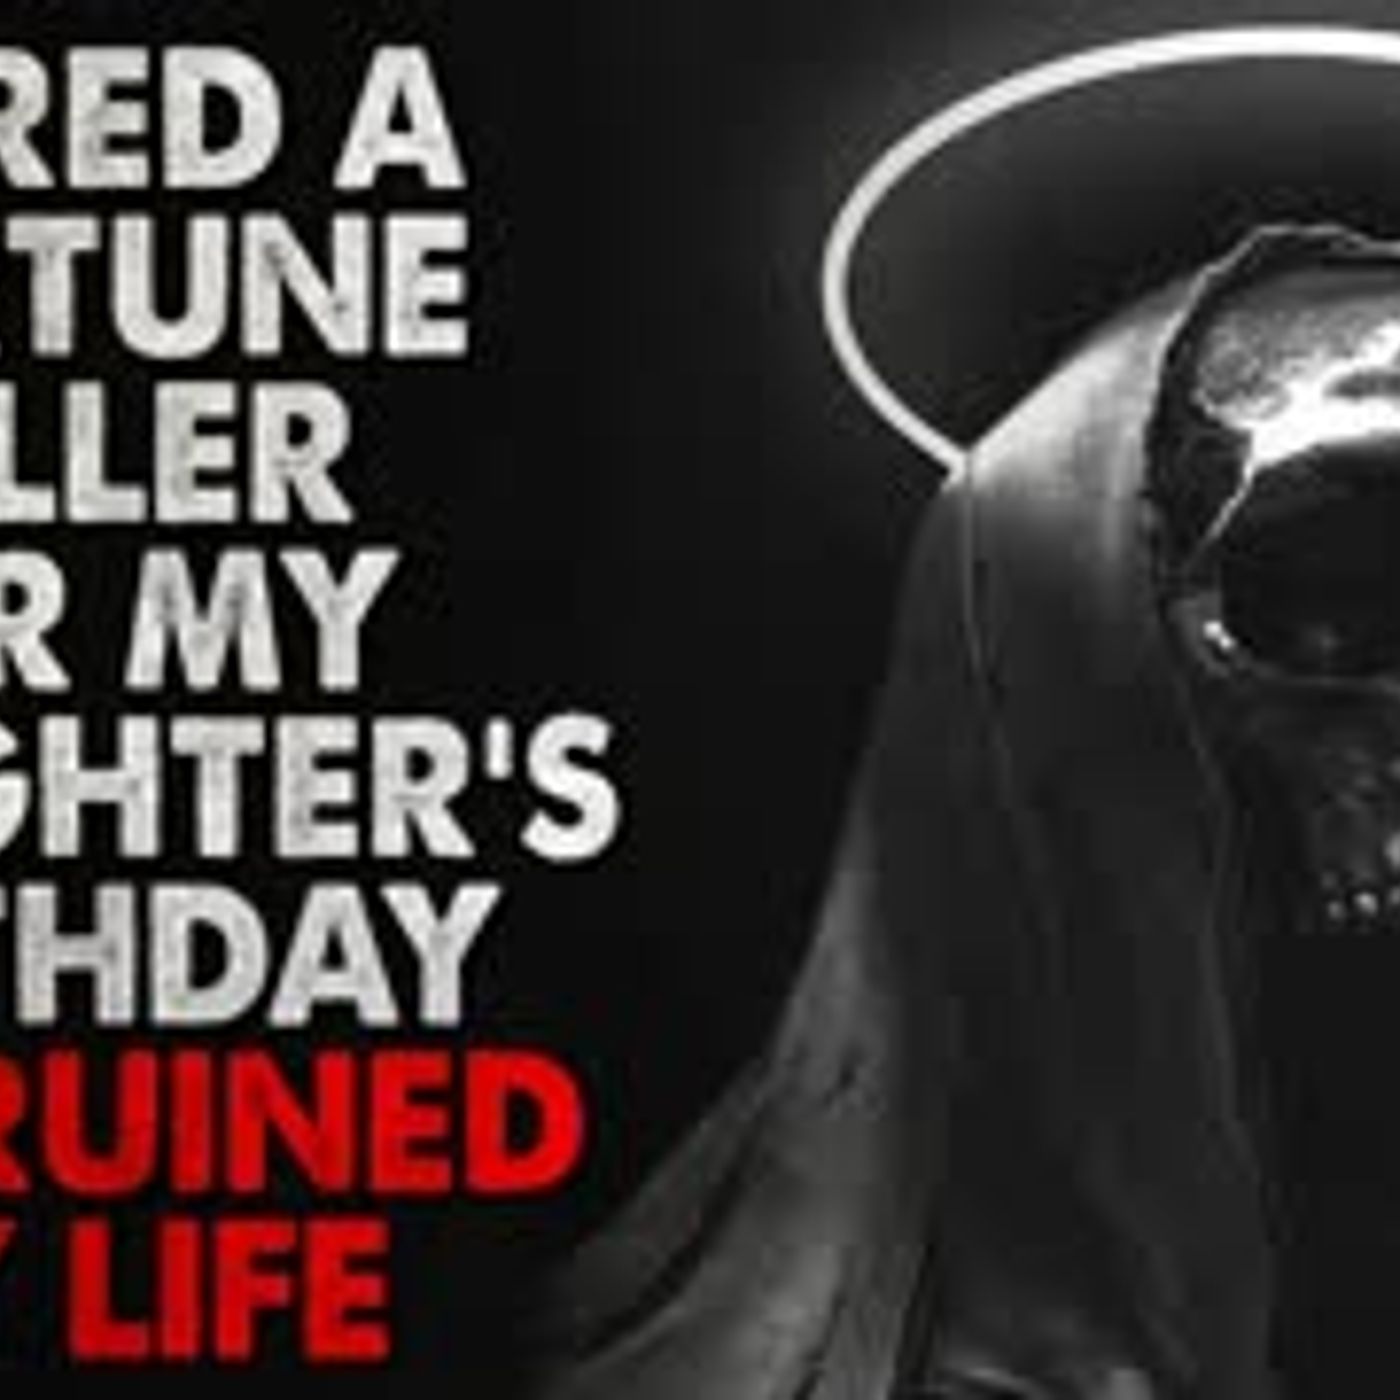 "I hired a fortune teller for my step daughter's birthday party. She ruined my life" Creepypasta